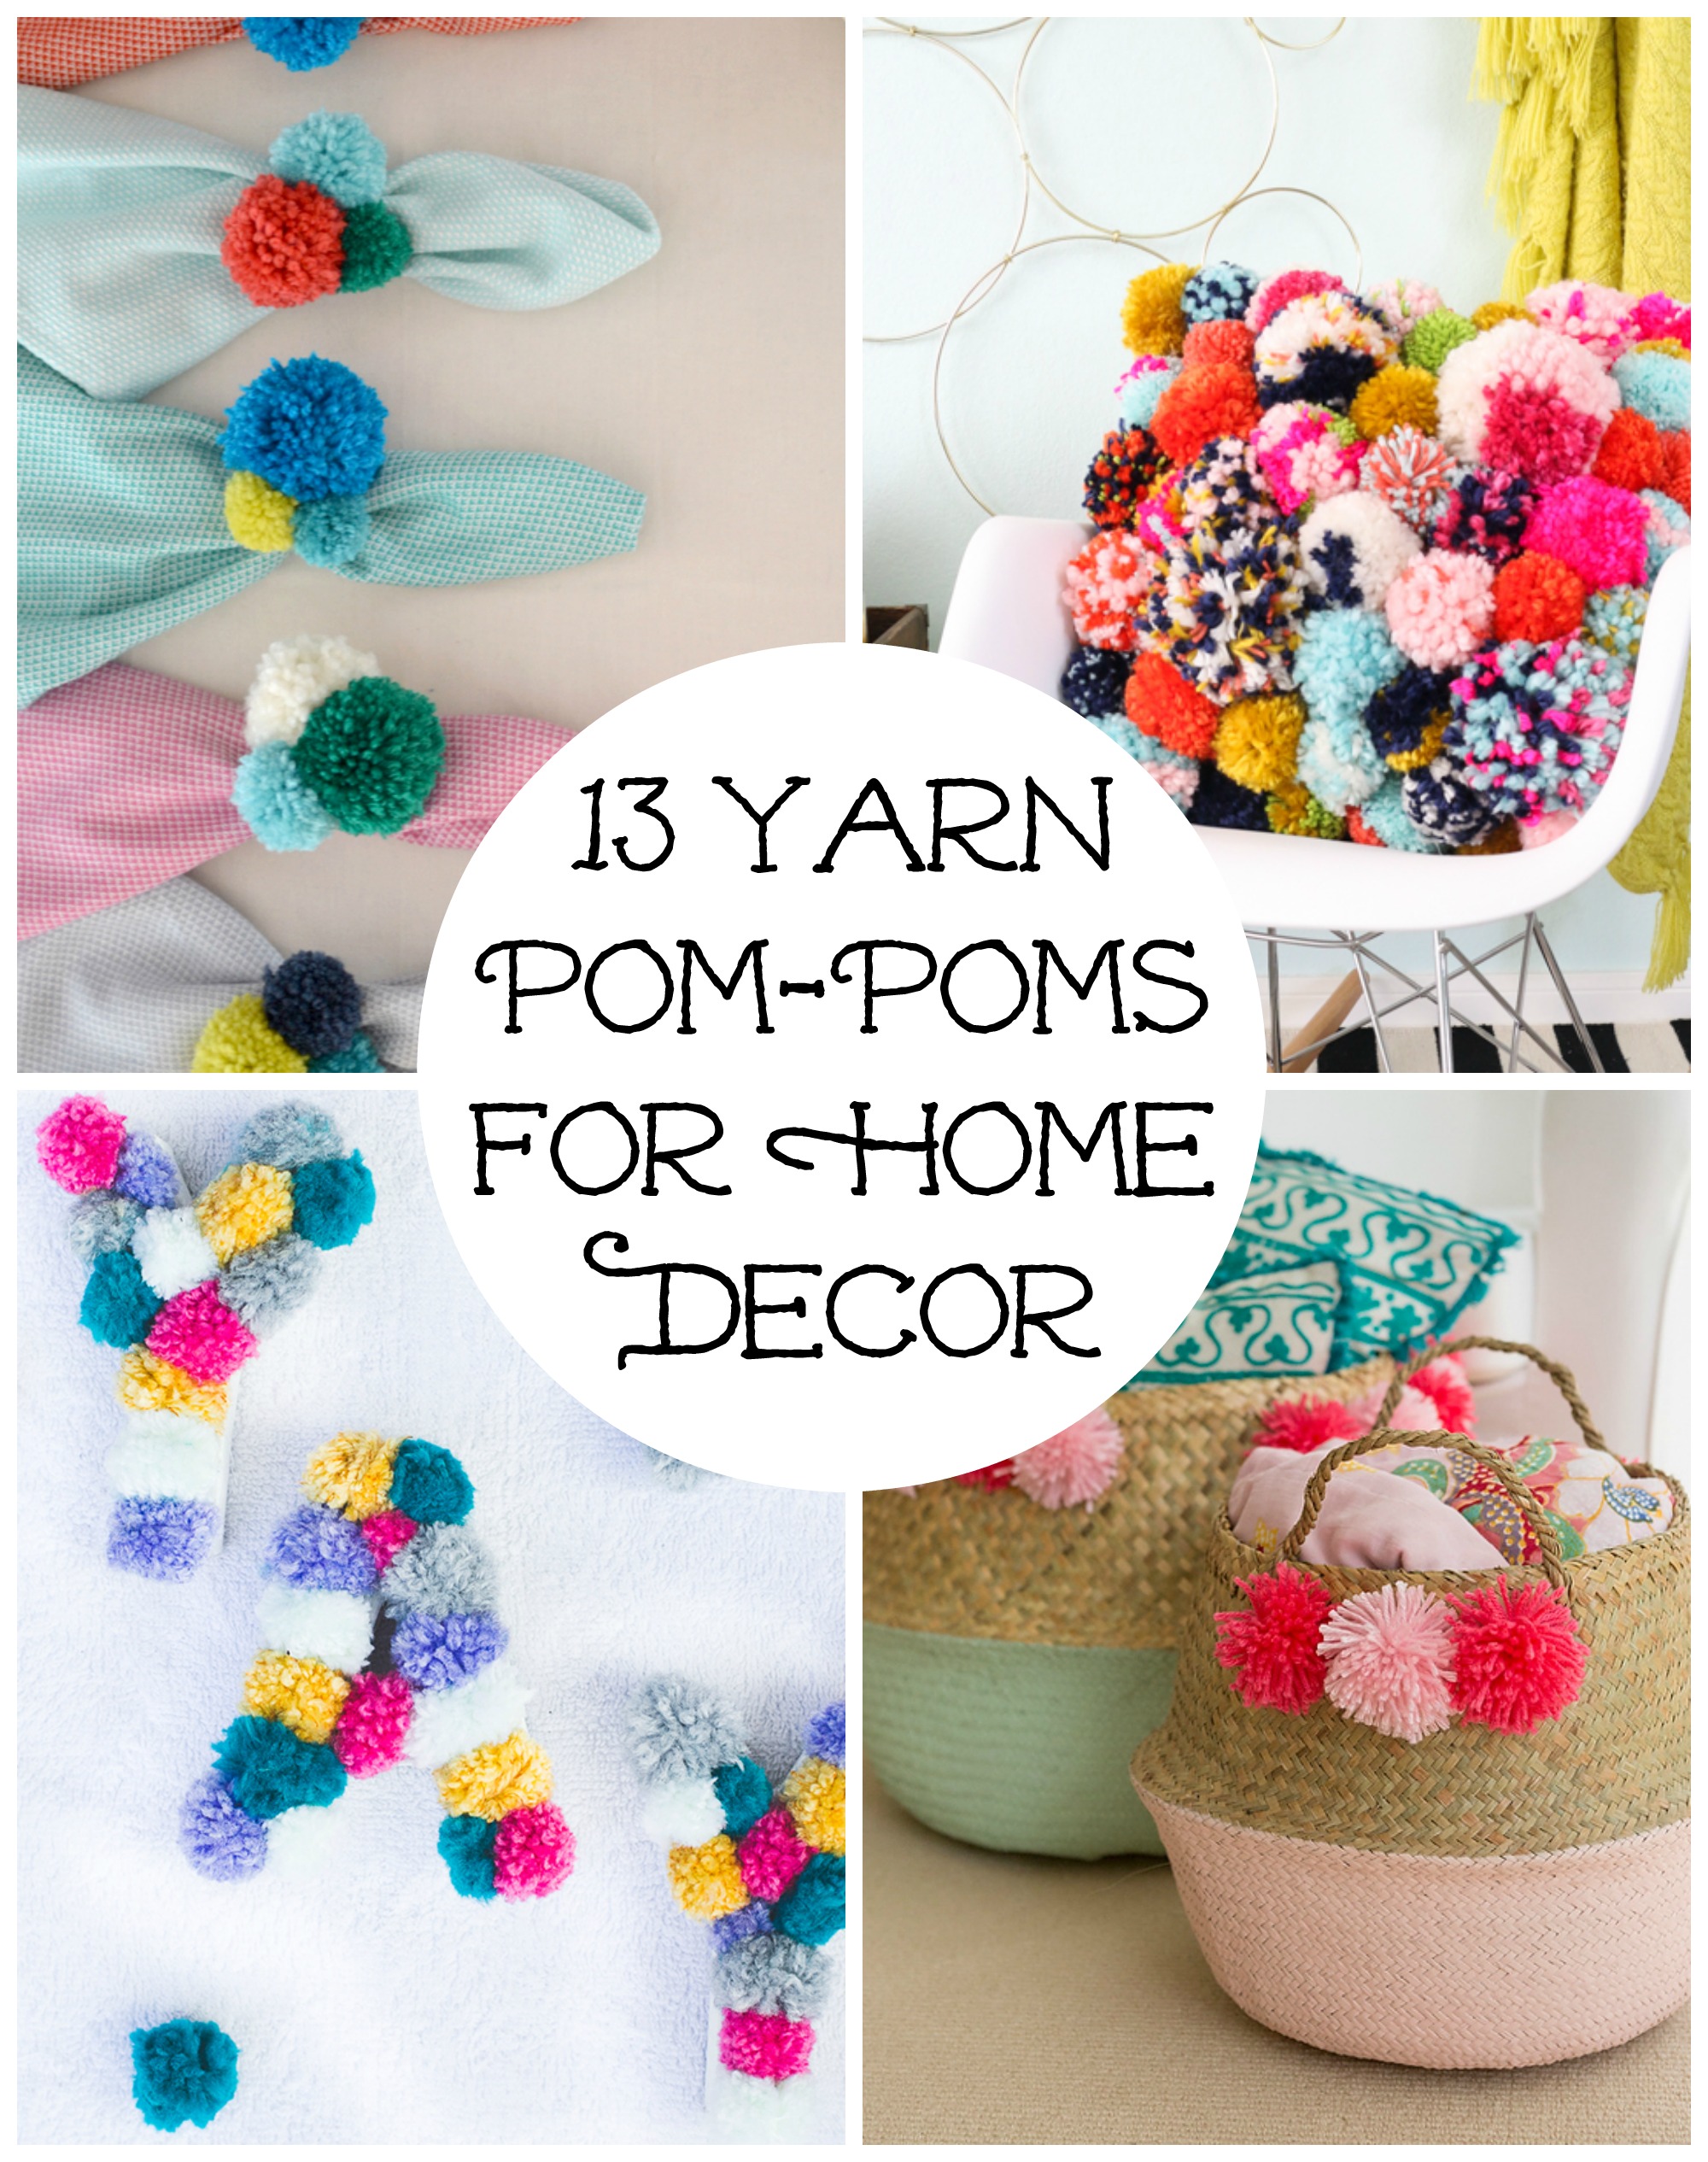 How to Make Pom Poms with a Cardboard Template